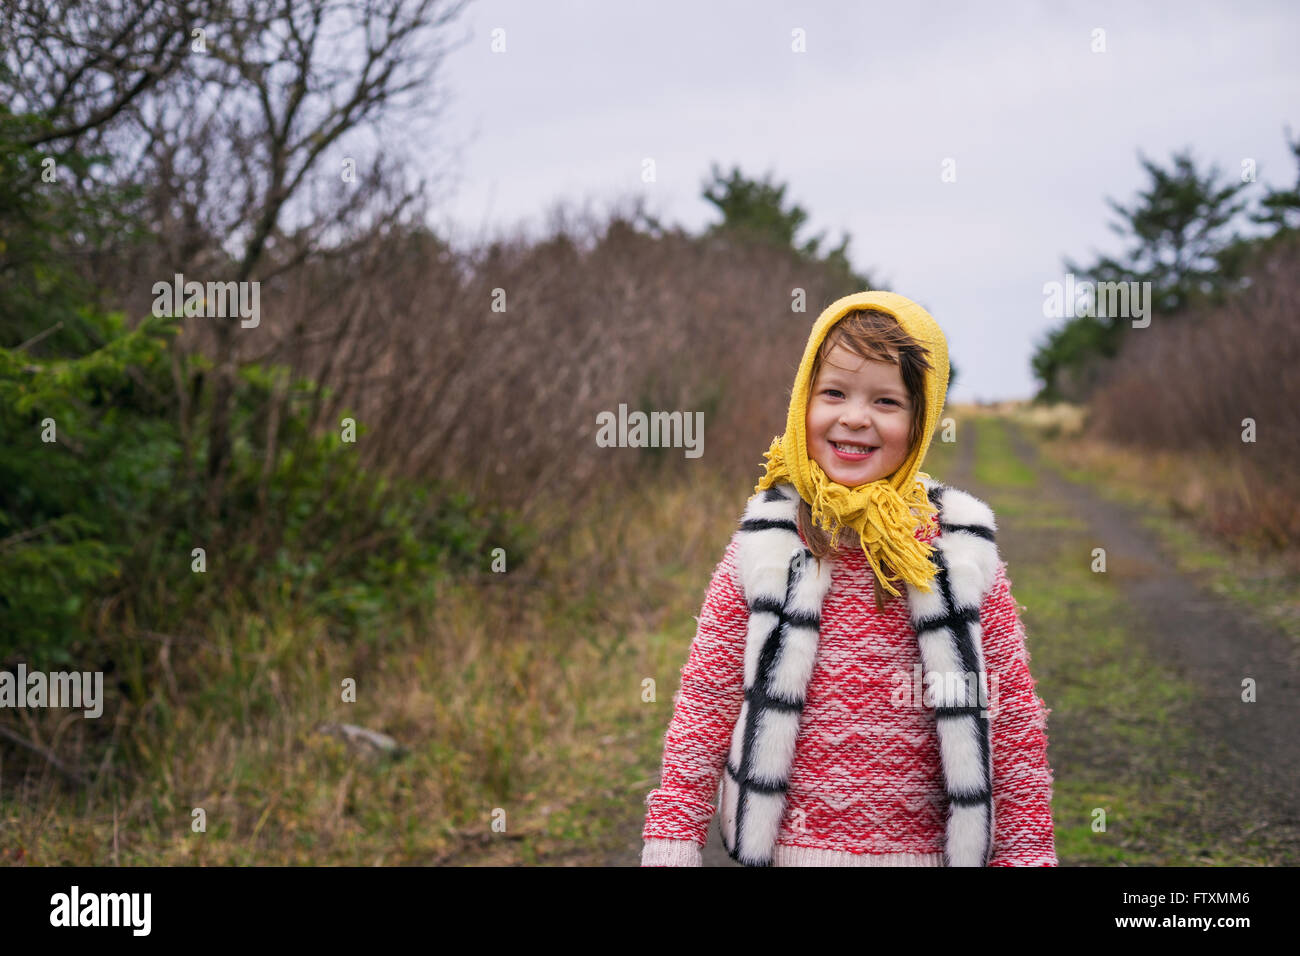 Smiling girl standing on rural footpath Stock Photo